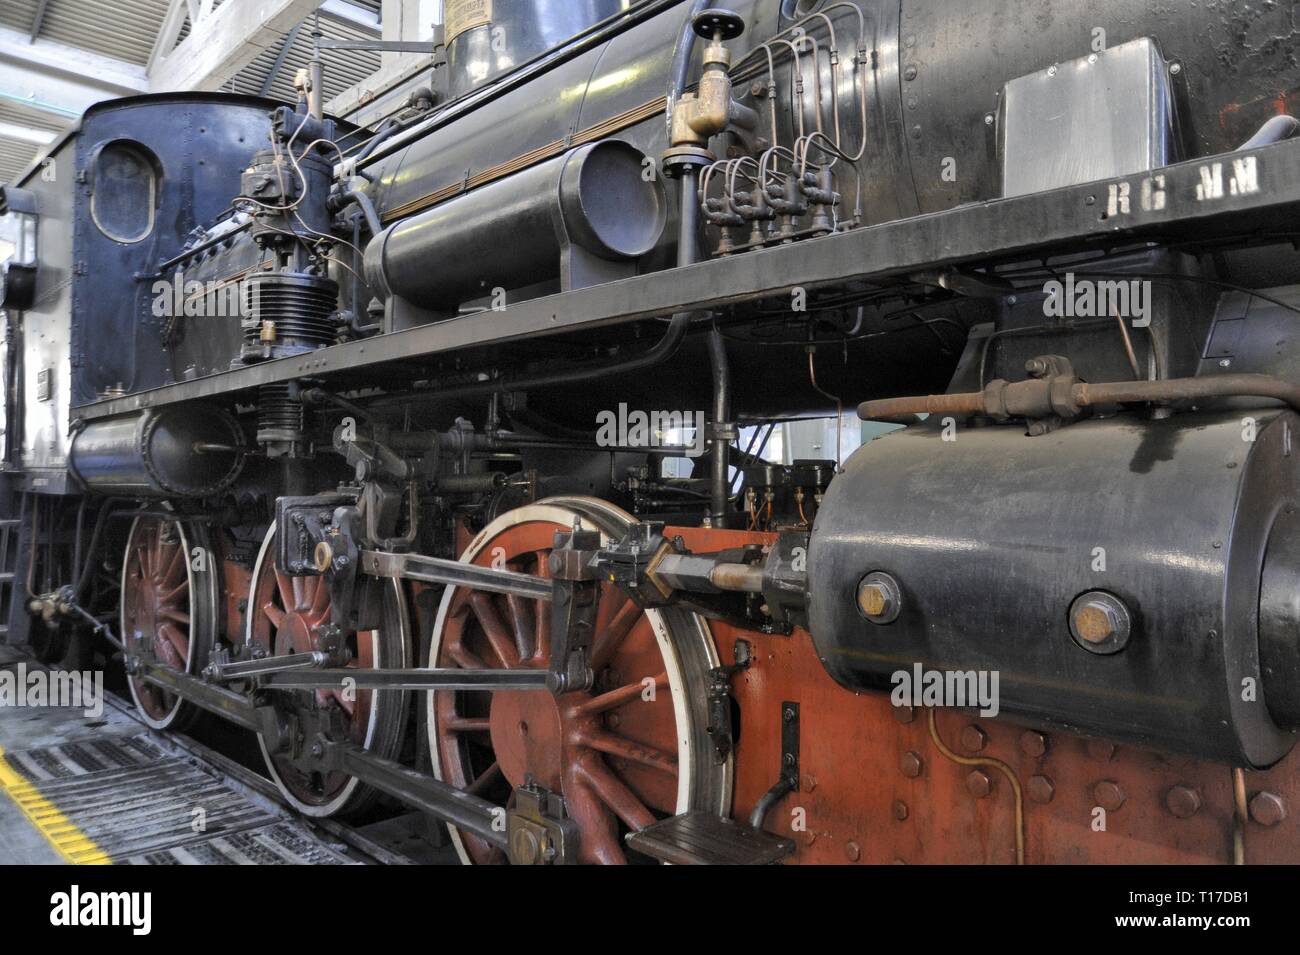 Fondazione FS Italiane, open day at the workshops of the Squadra Rialzo of  Milano Centrale station, where historical trains are preserved and  restored, on the occasion of the FAI Spring Days. Steam